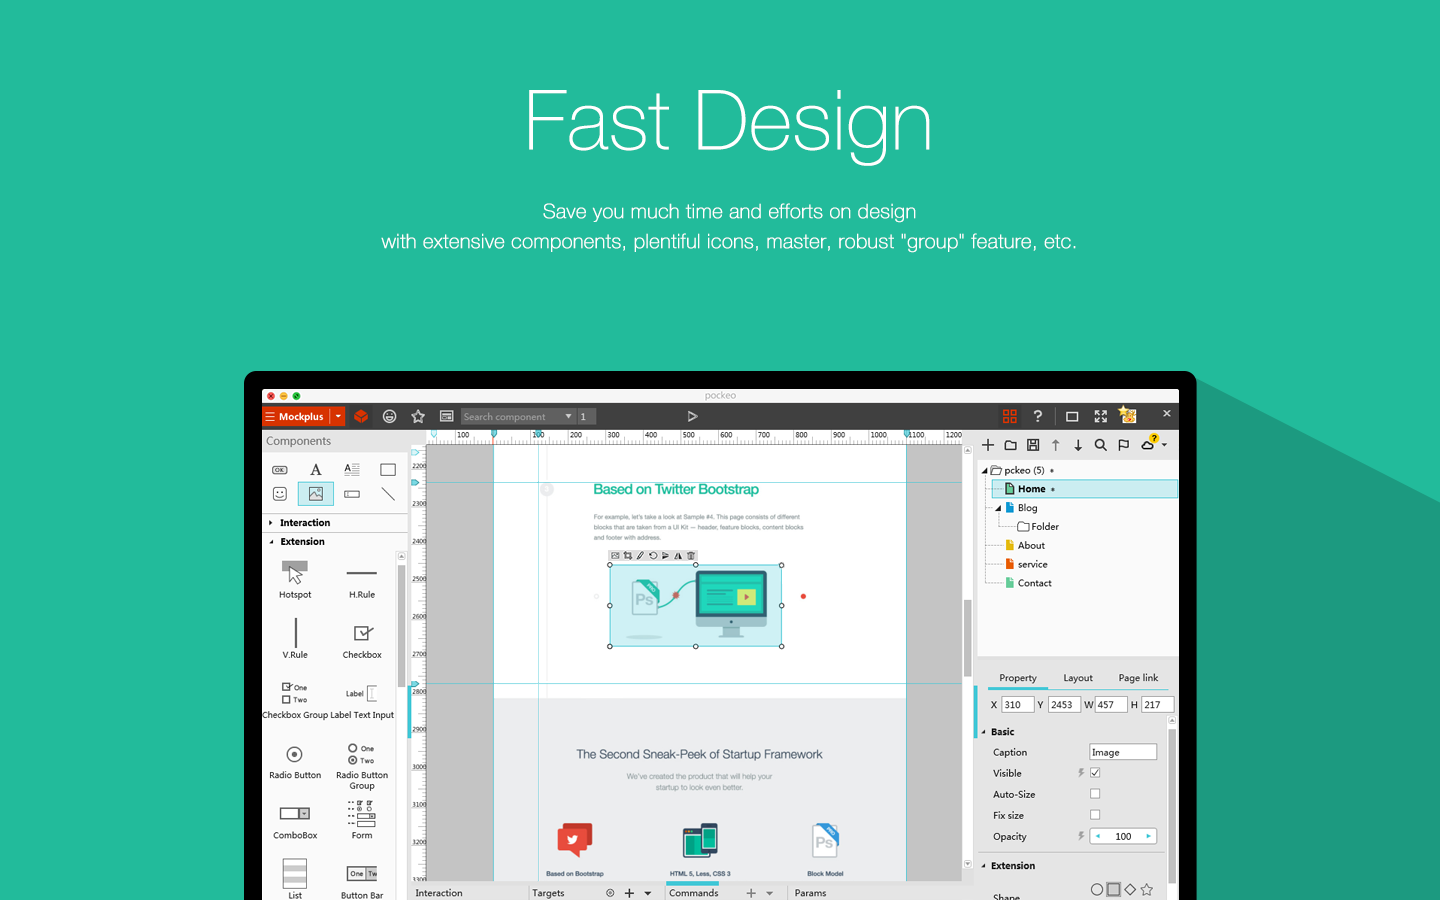 Download The 7 Best Prototyping Tools for UI and UX Designers in 2018